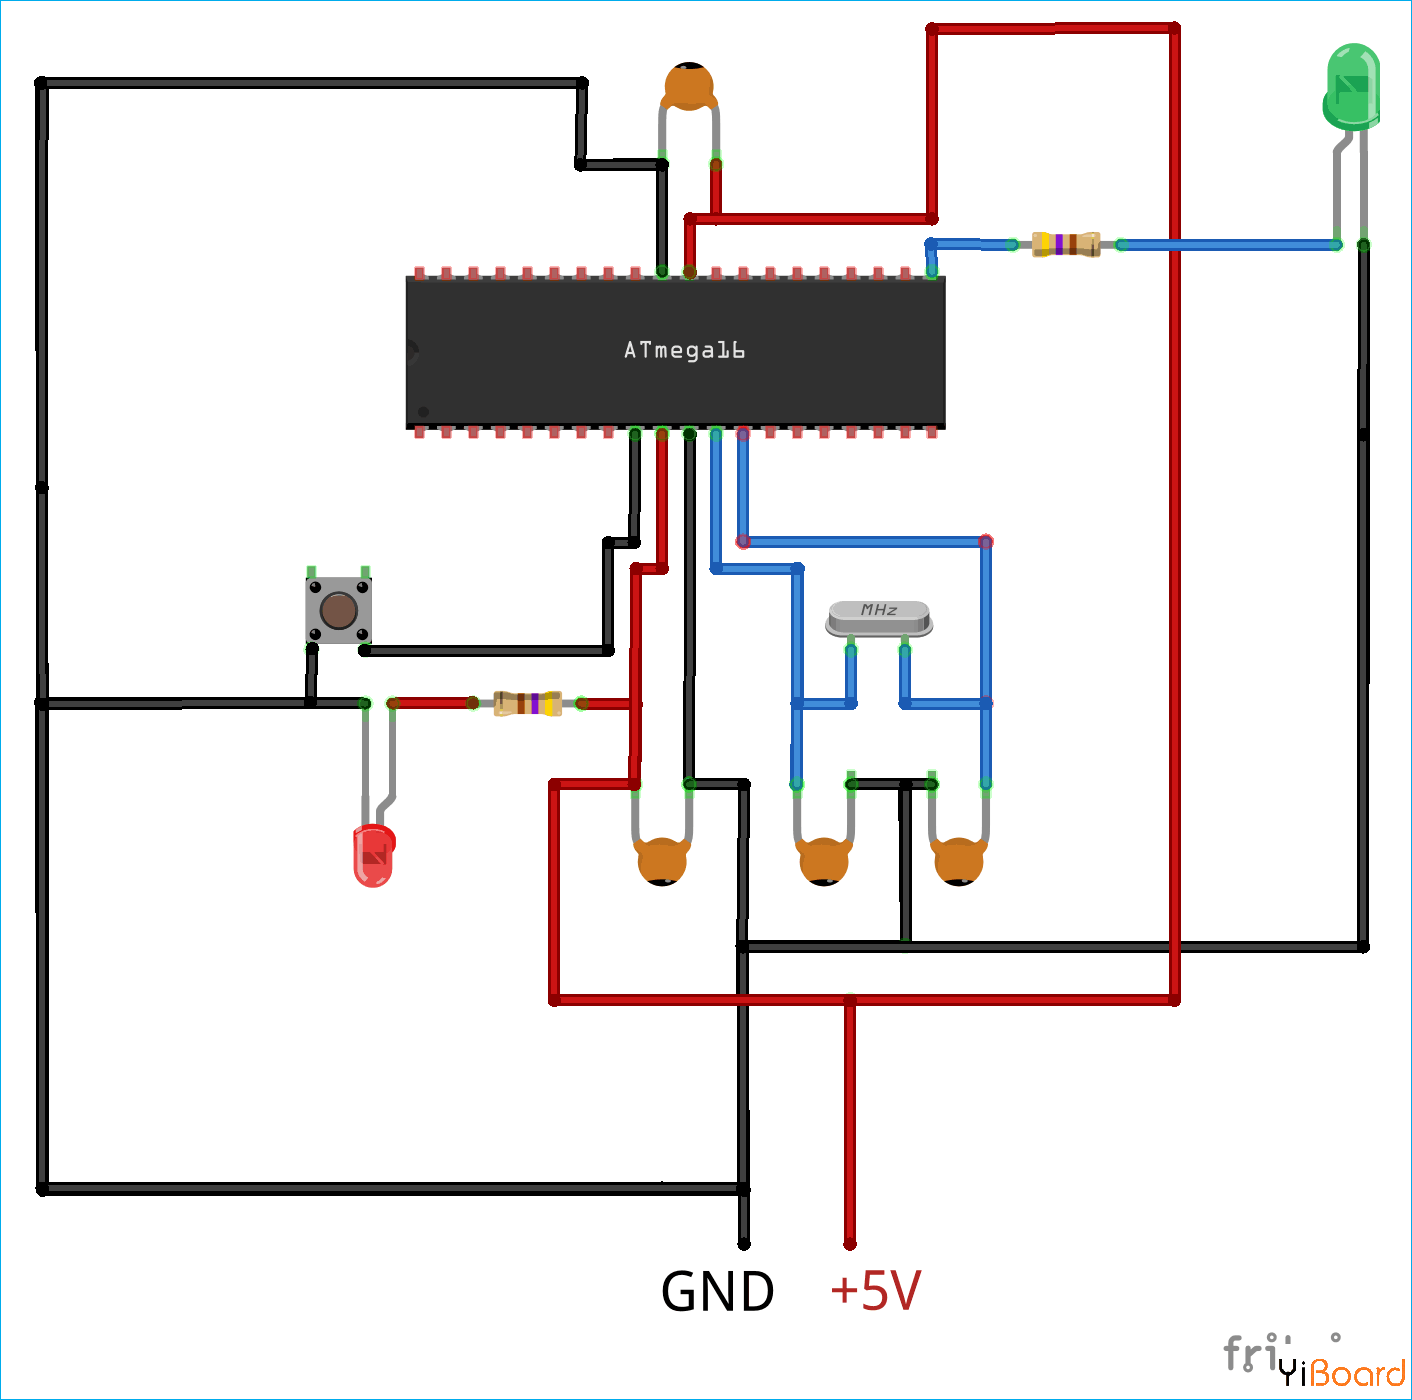 Circuit-Diagram-for-using-PWM-with-AVR-Microcontroller-Atmega16.png